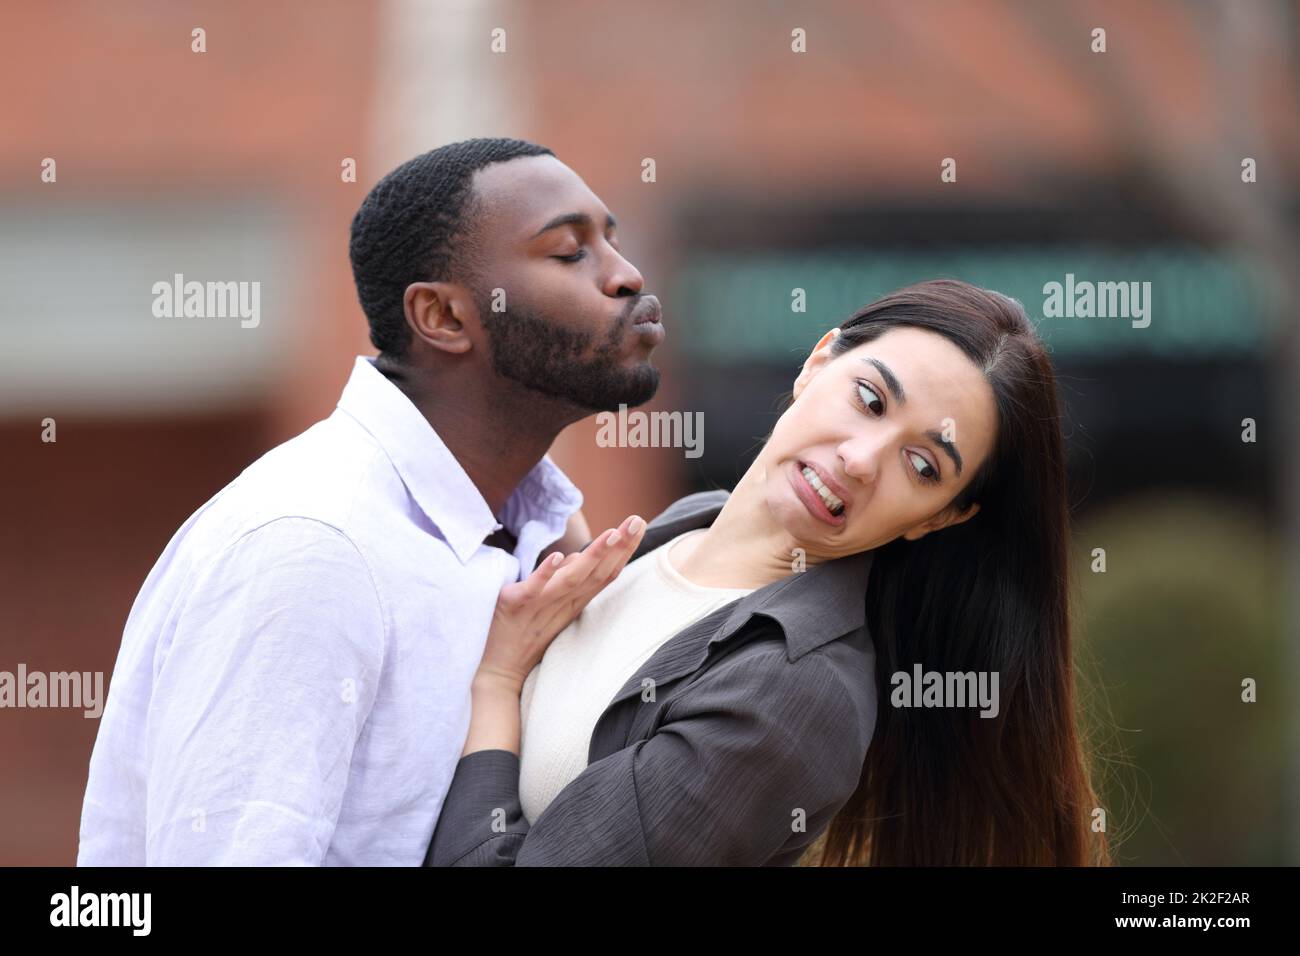 Man trying to kiss to a woman who is pulling him away Stock Photo